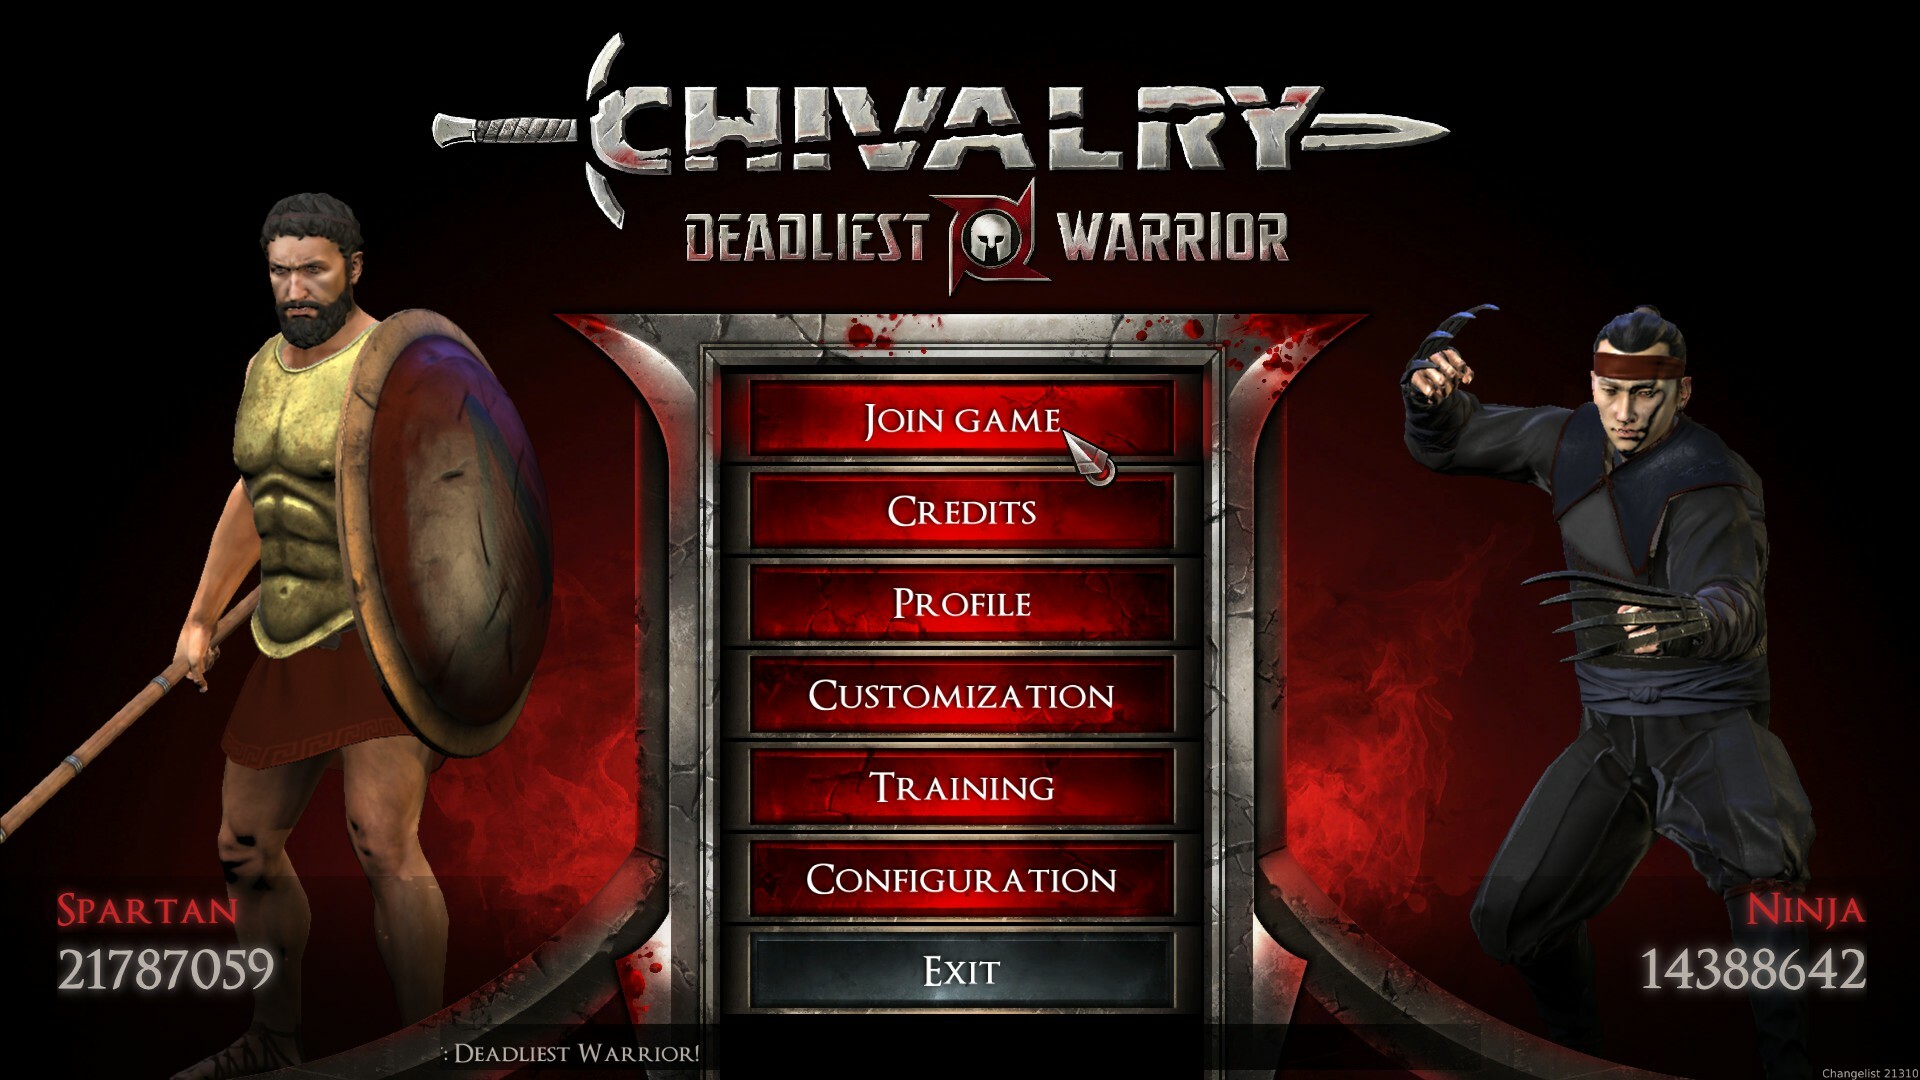 UI for the game Chivalry Deadliest Warrior. 